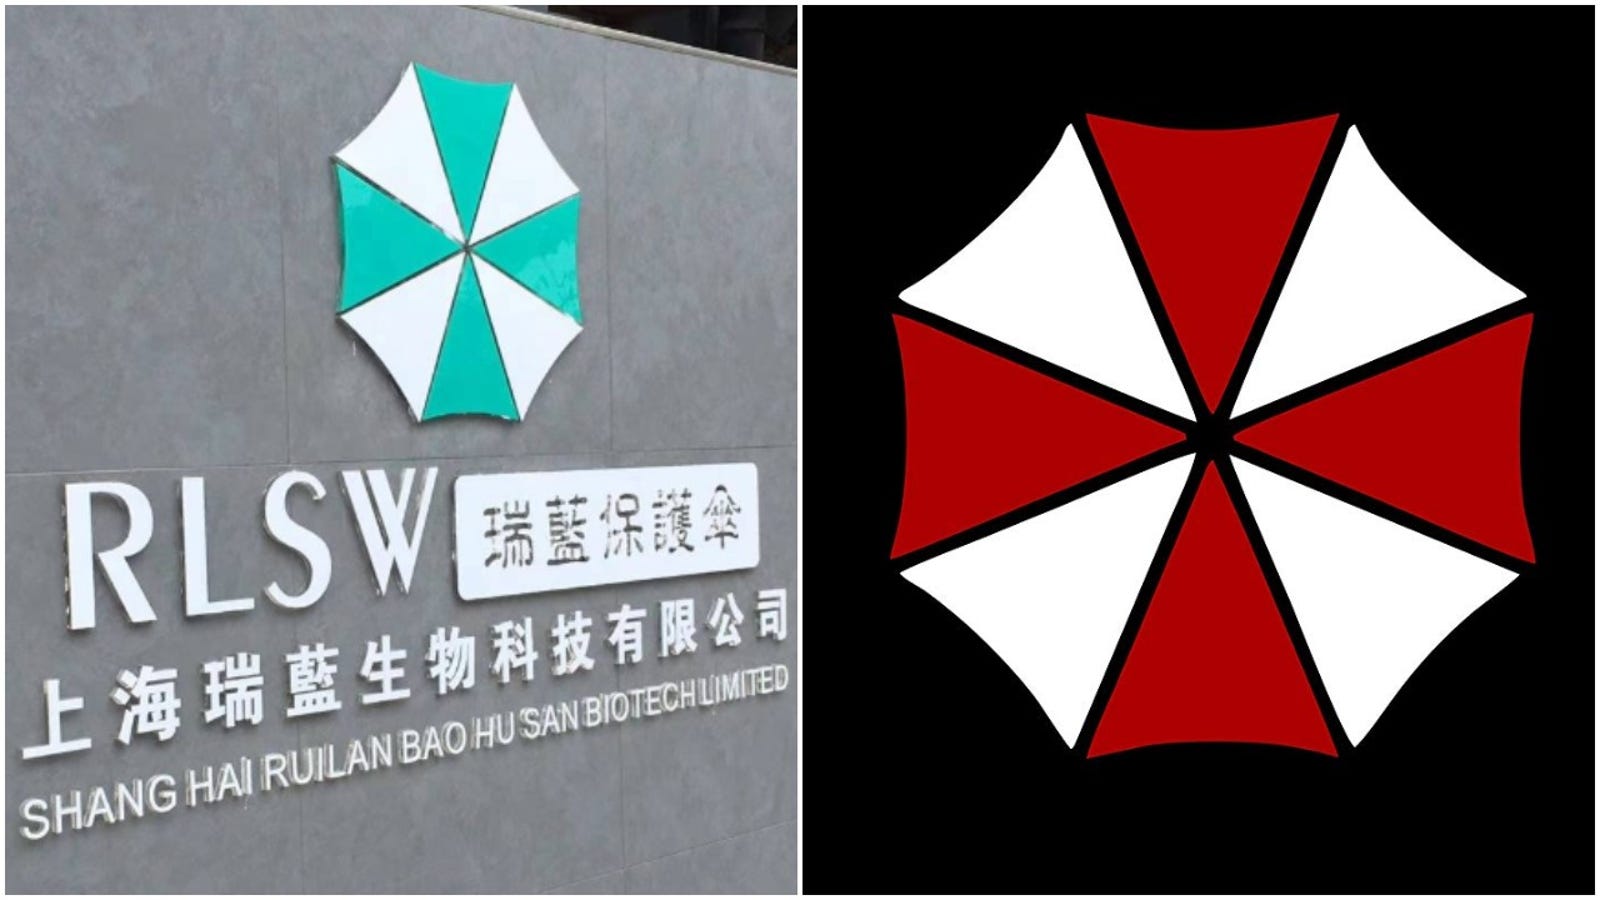 Chinese Resident Evil Fans Think This Biotech Company's Logo Looks Familiar